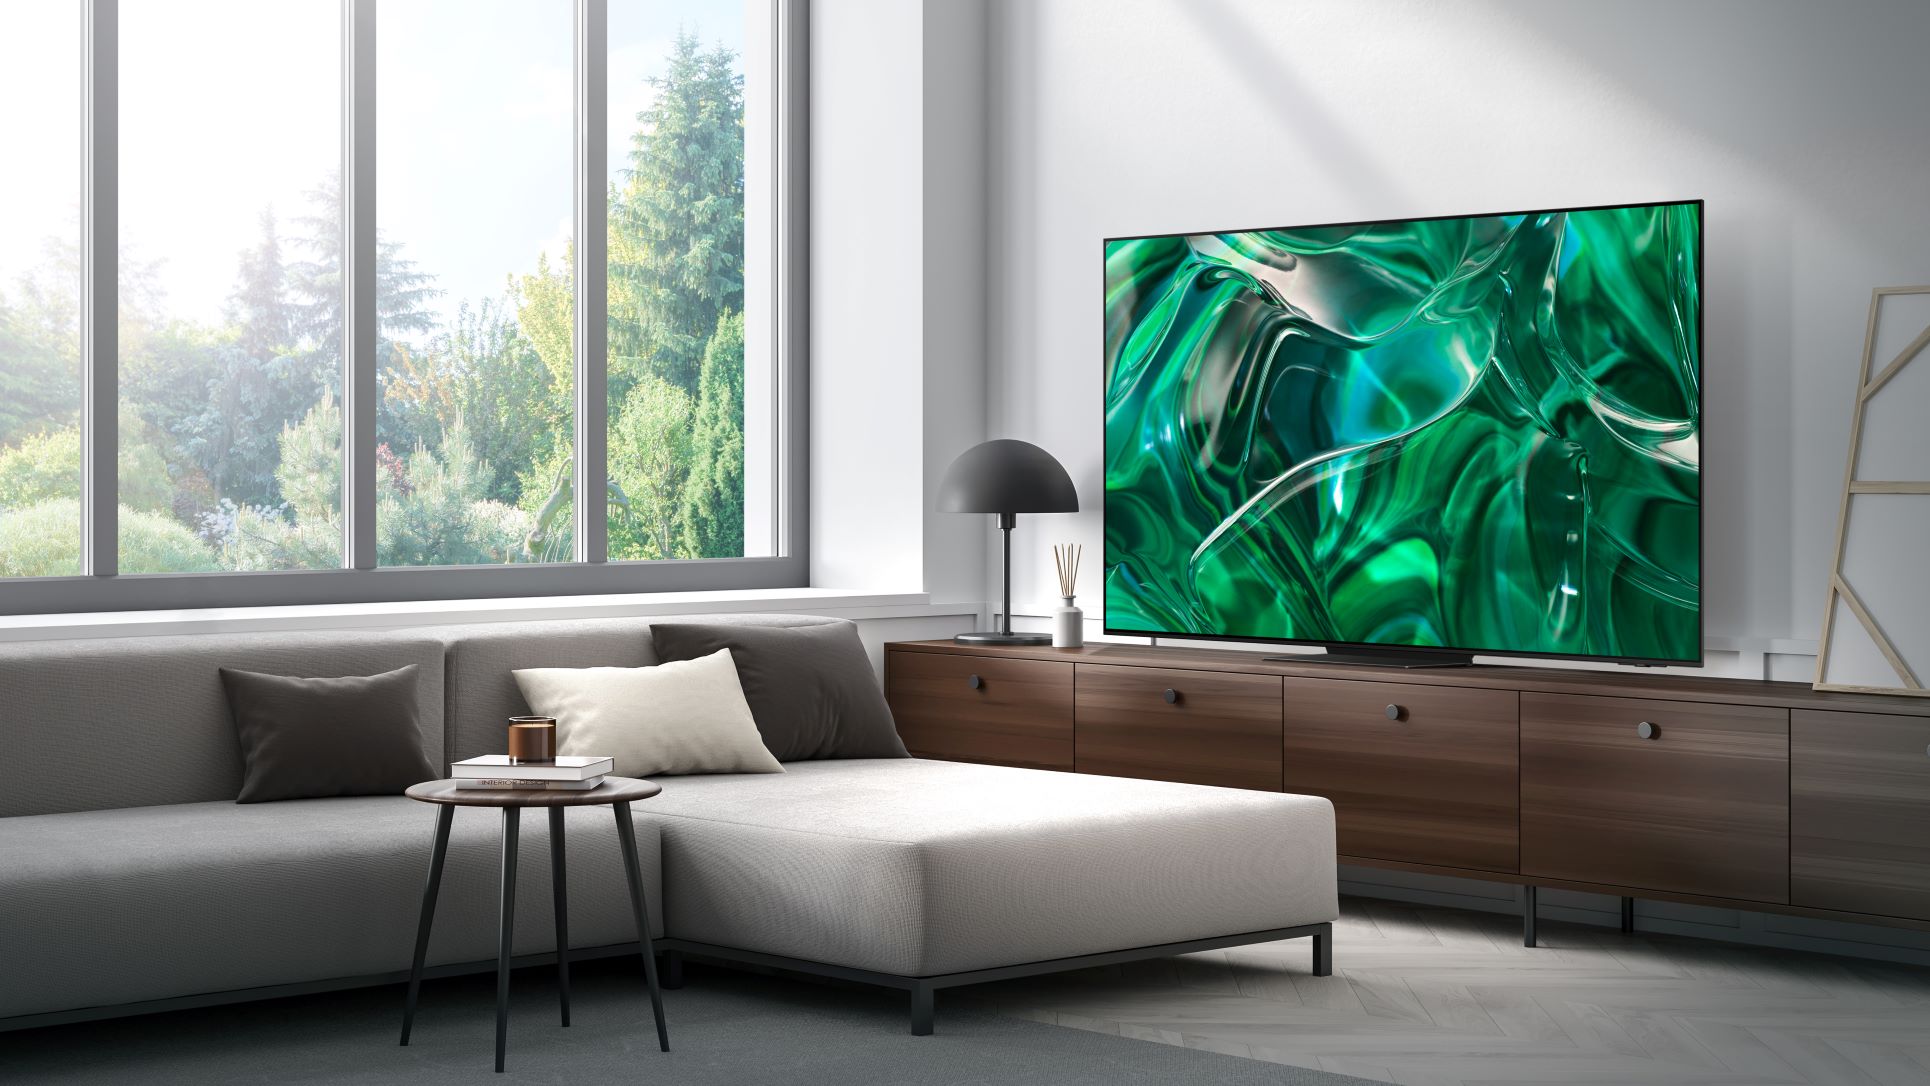 Samsung Launches Made in India OLED TV with Neural Quantum Processor 4K